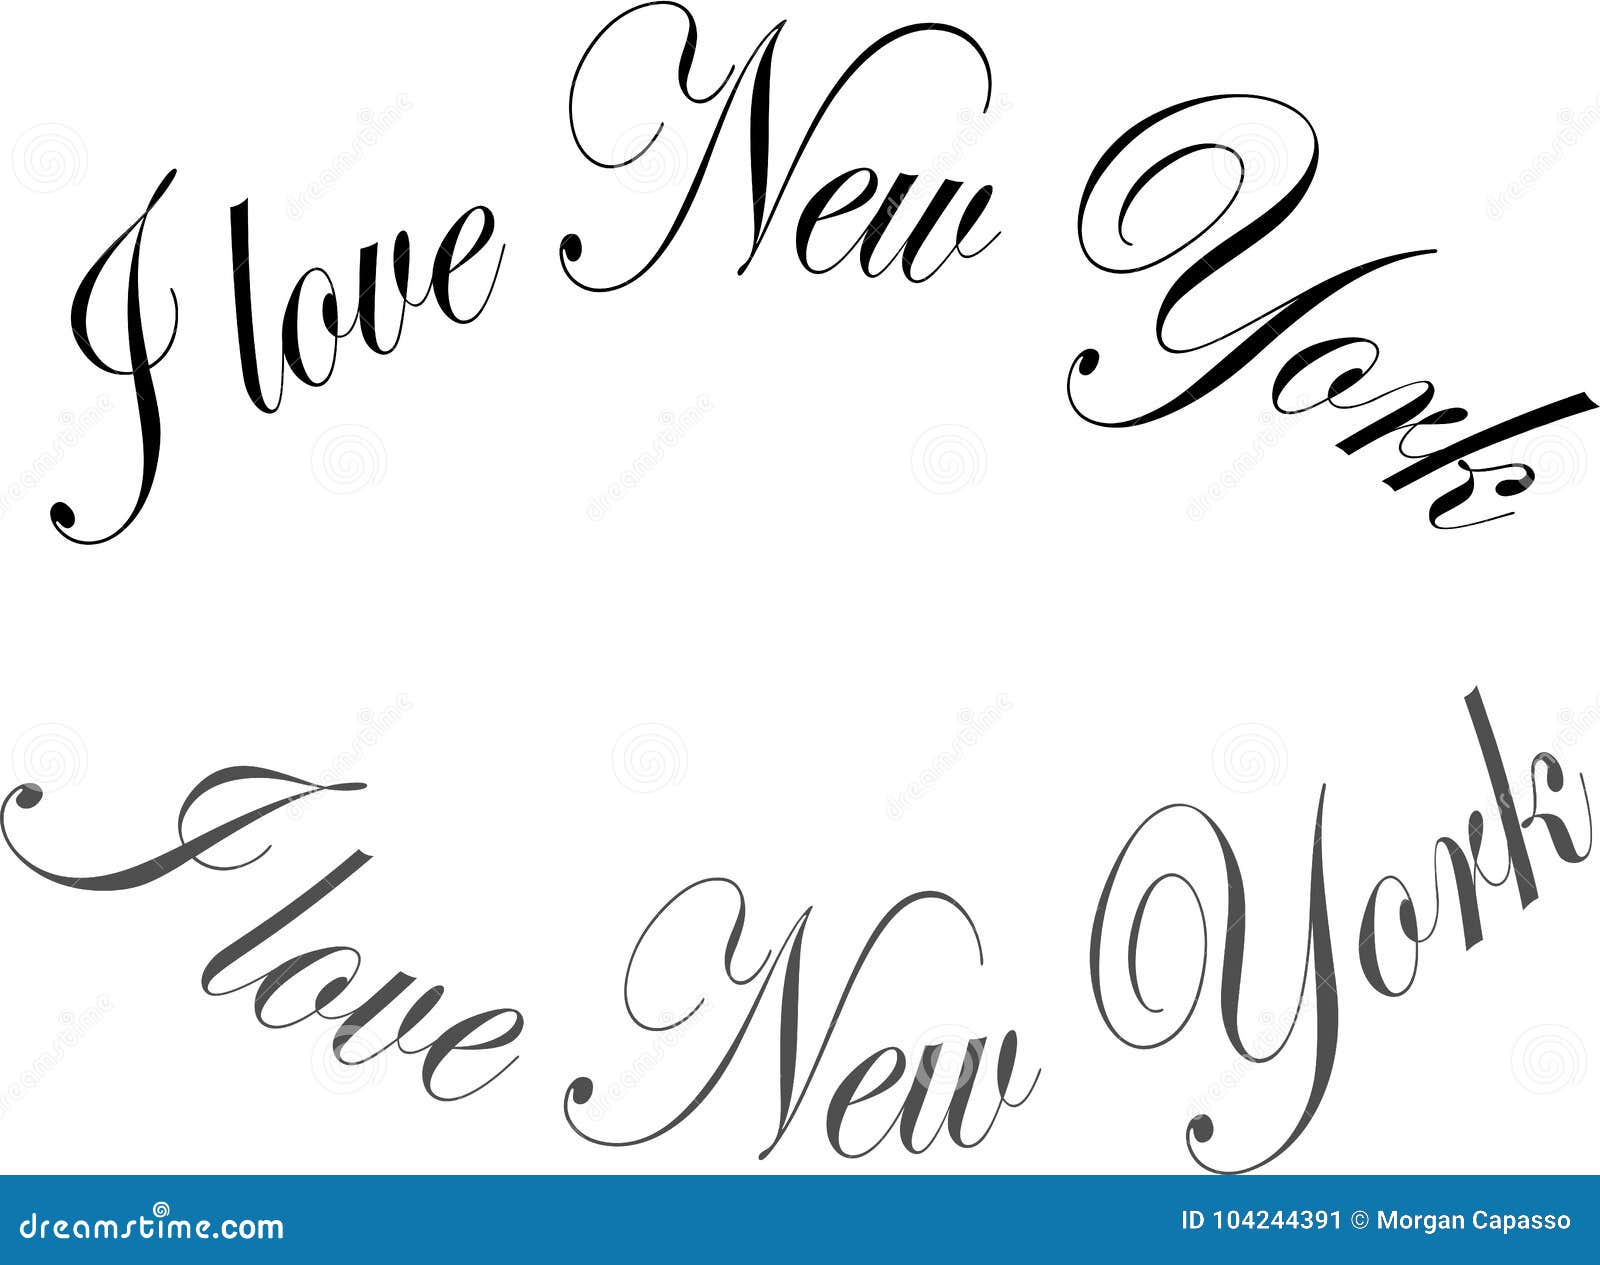 I Love New York text sign. stock vector. Illustration of ...